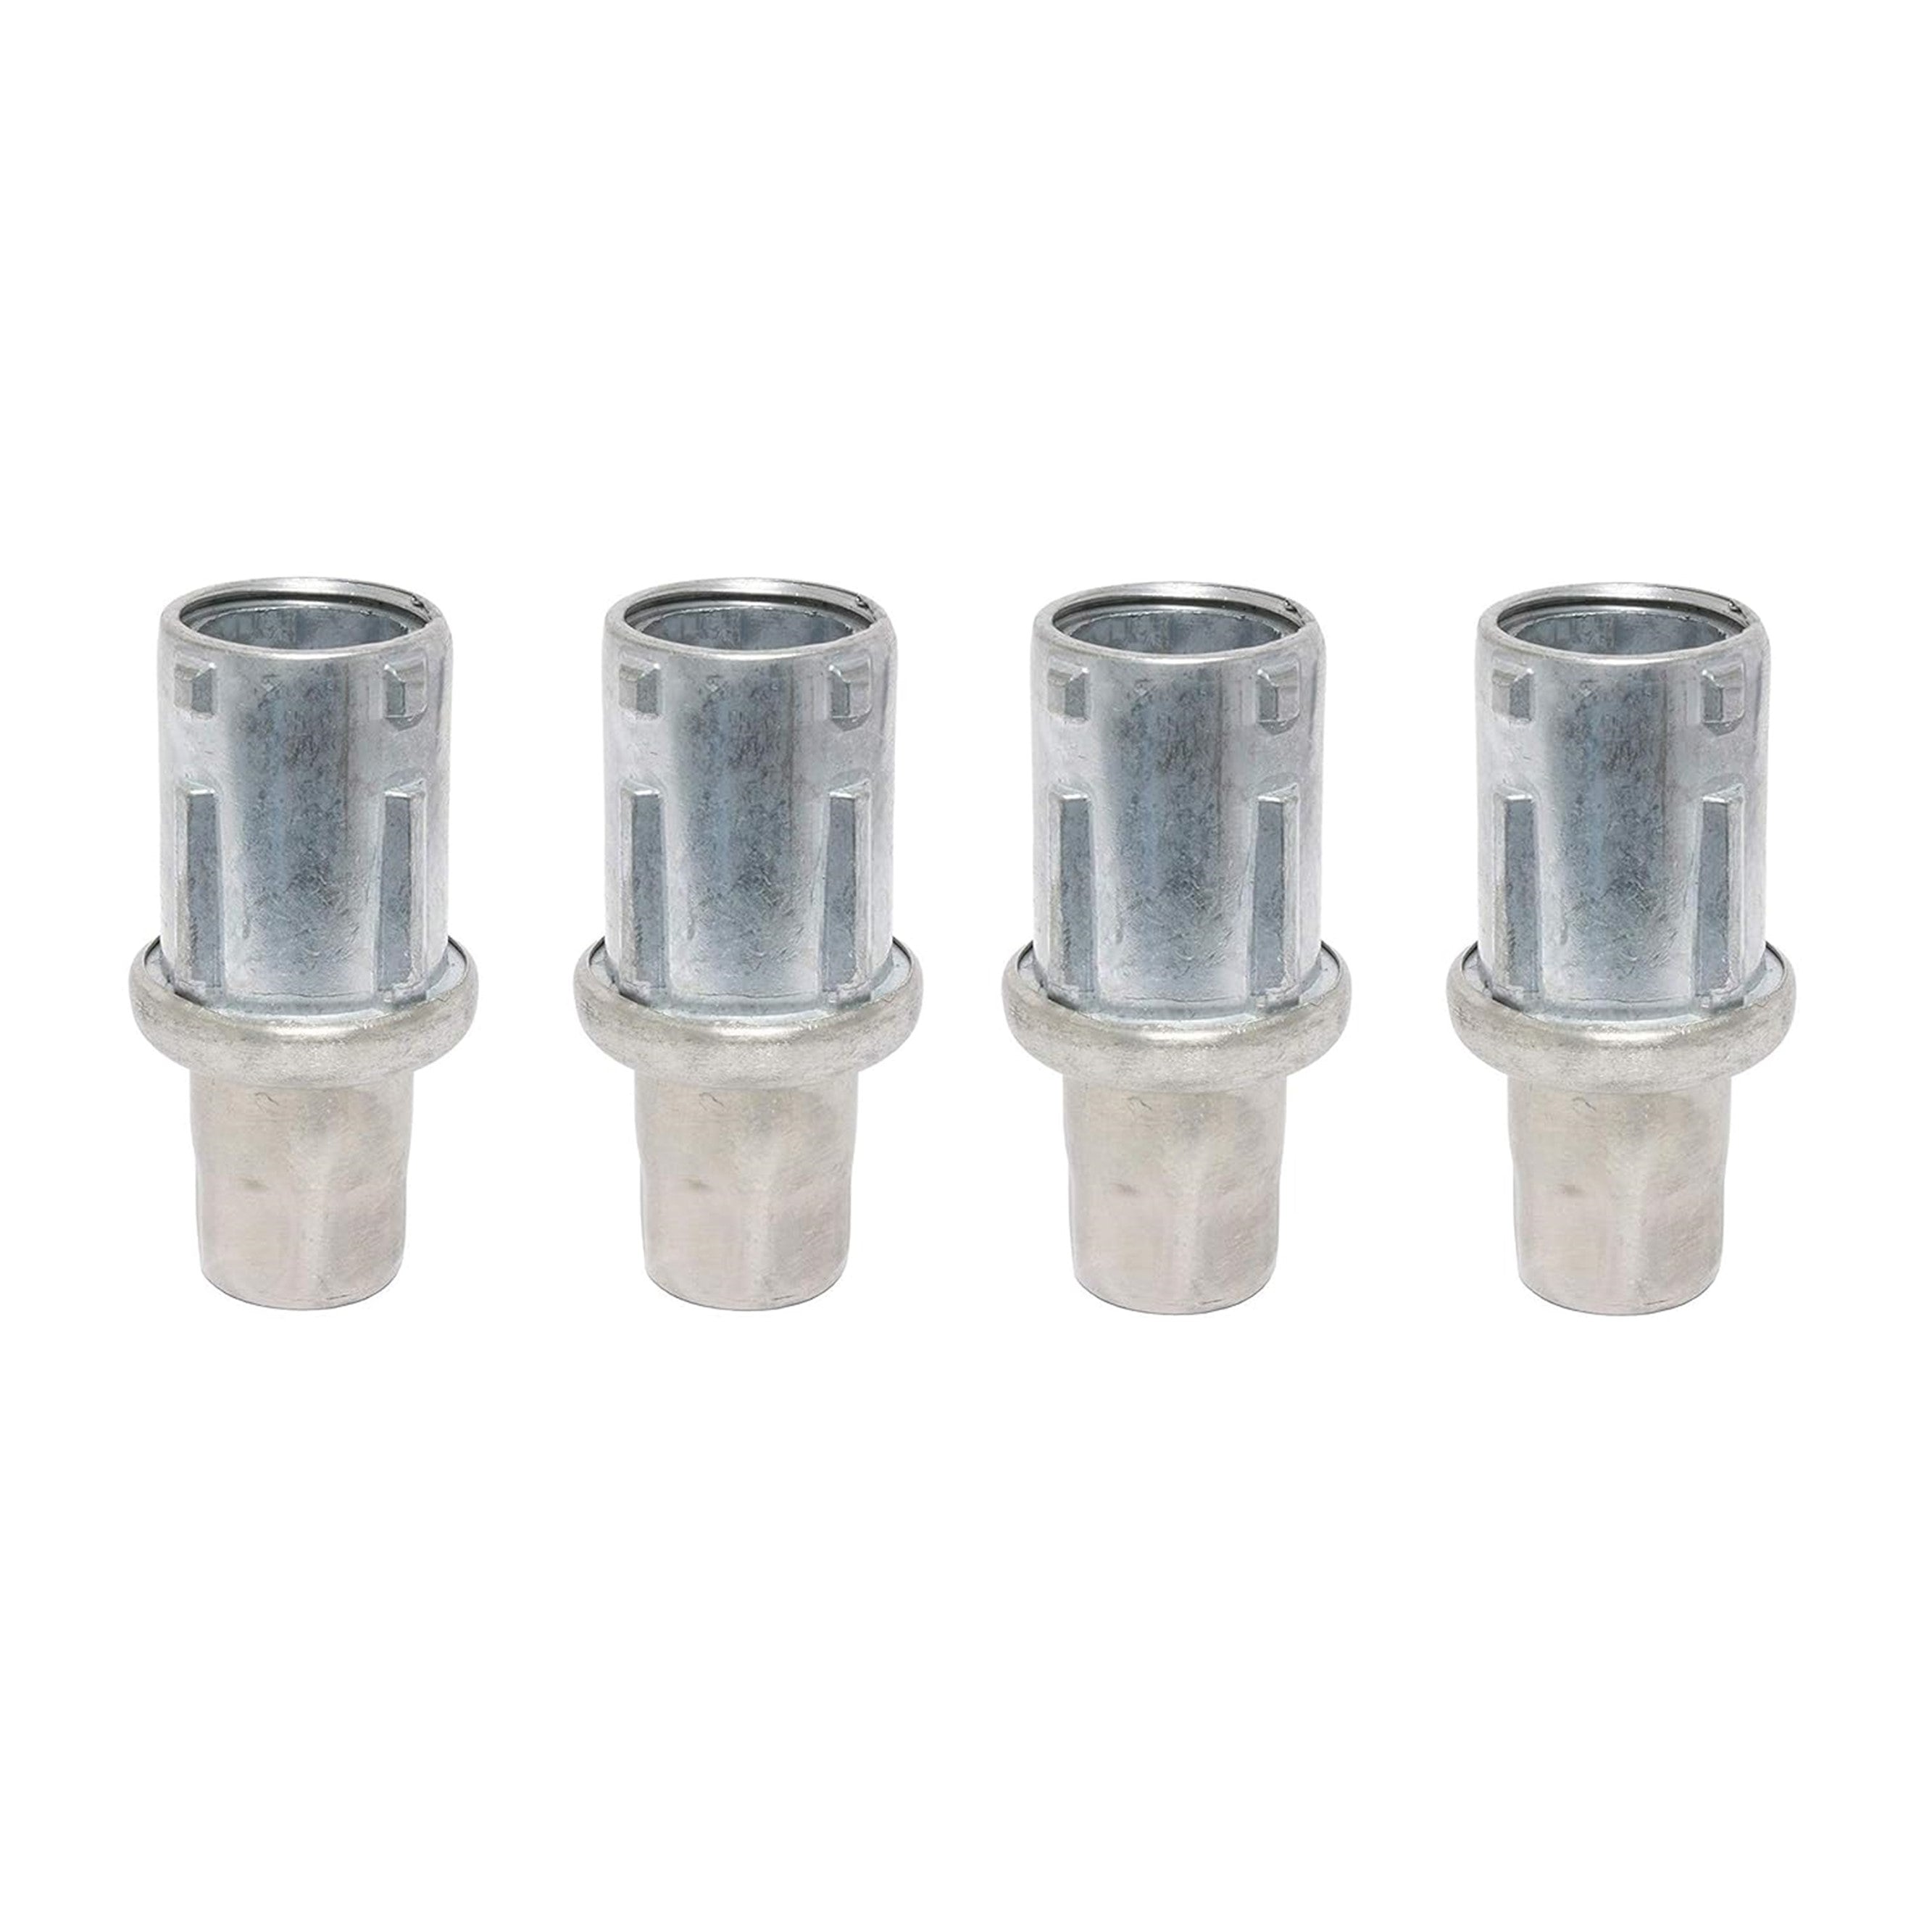 Leyso Set of 4 Adjustable Height Stainless Steel Bullet Feet for Stainless Steel 1-5/8" O.D Tubing, FT-S3